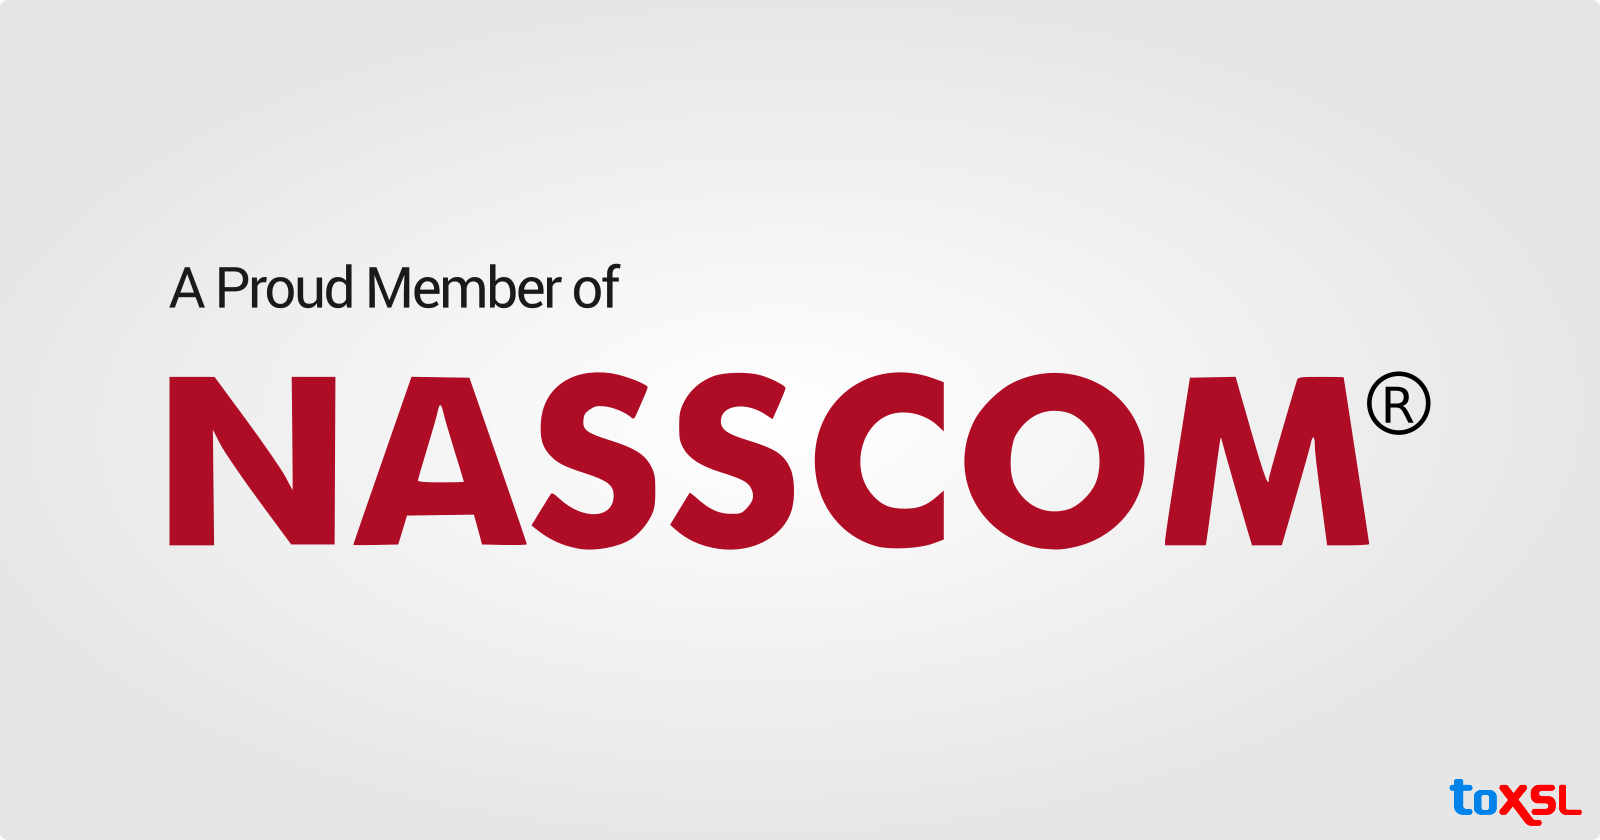 Delighted To Be An Illustrious Member of NASSCOM!!